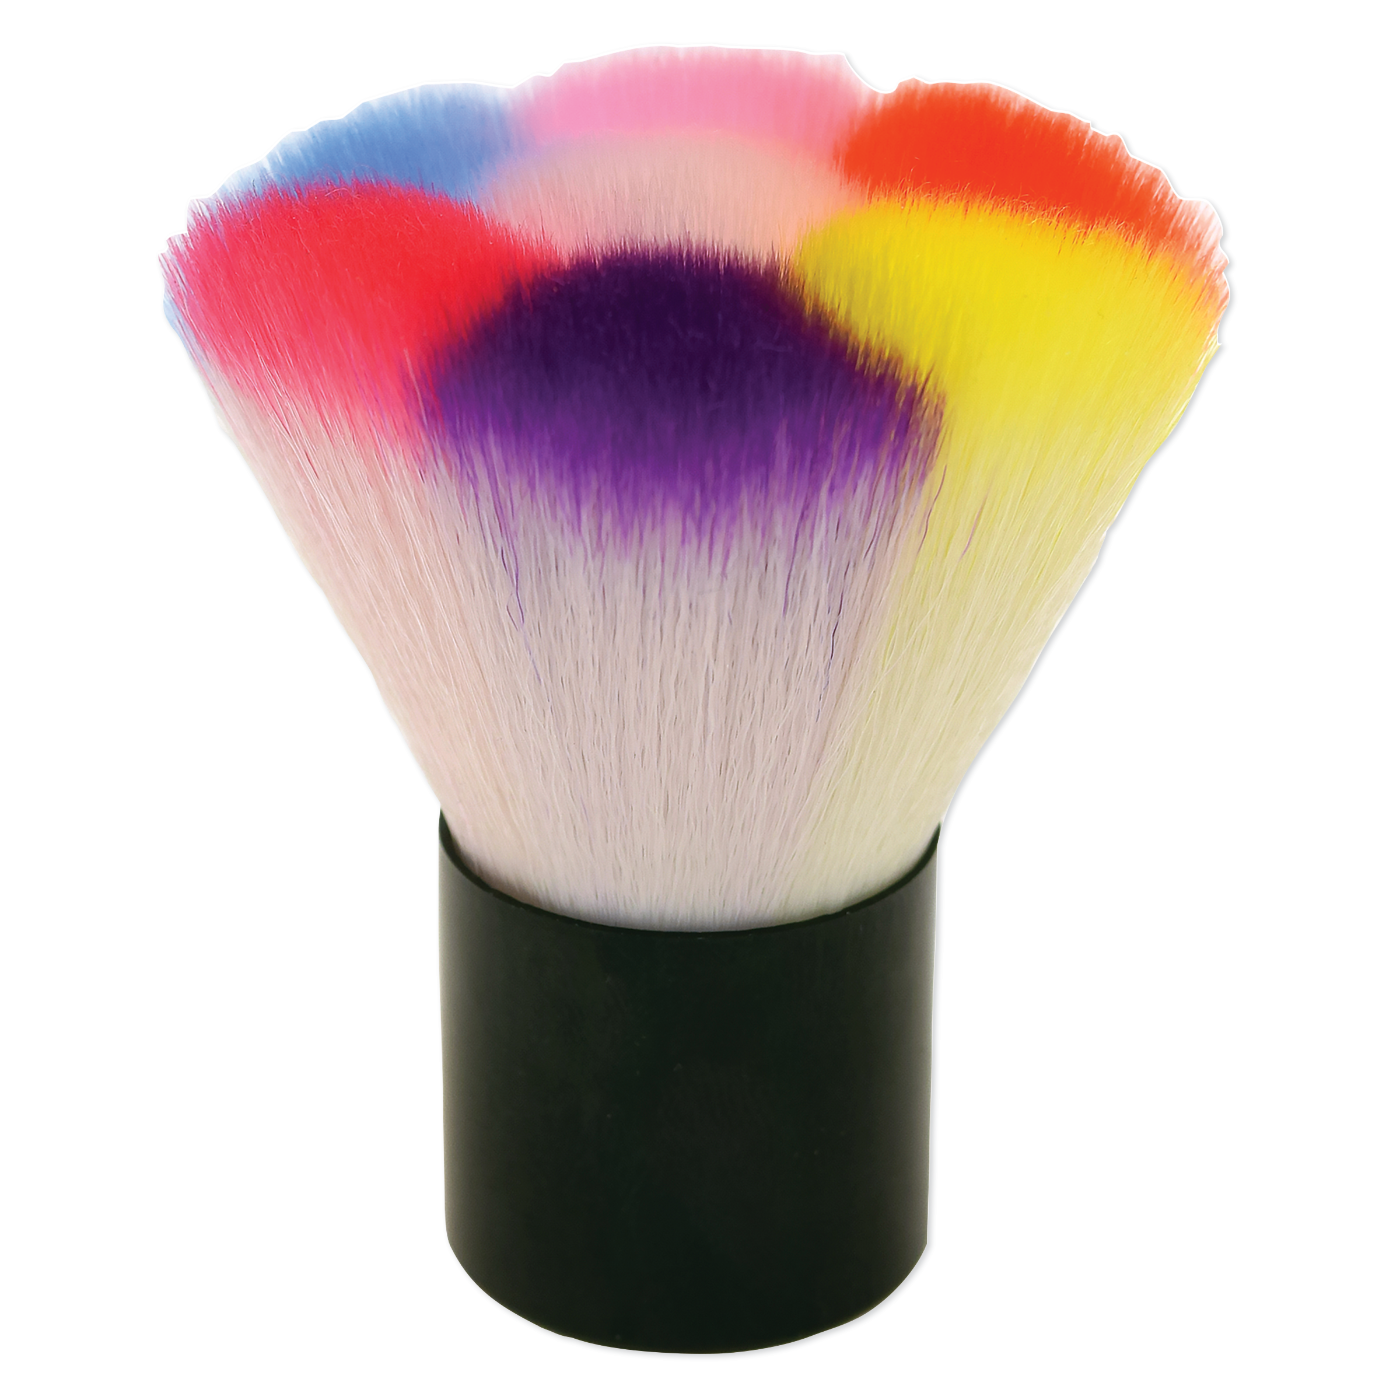 Nail Duster, Multi-colored - 2-1/2"